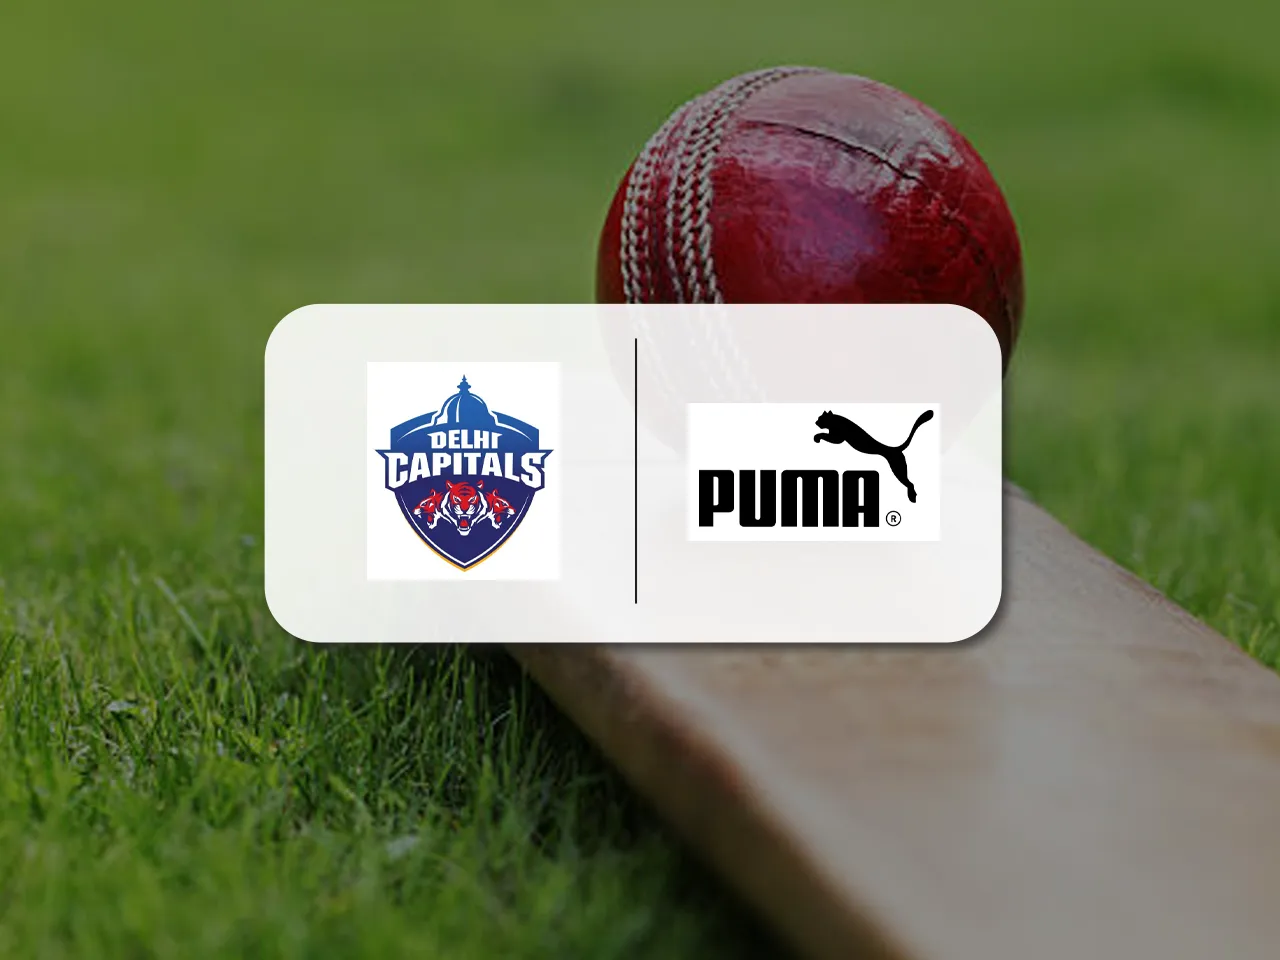 Puma collaborates with Delhi Capitals as their kit partner in a multi-year deal